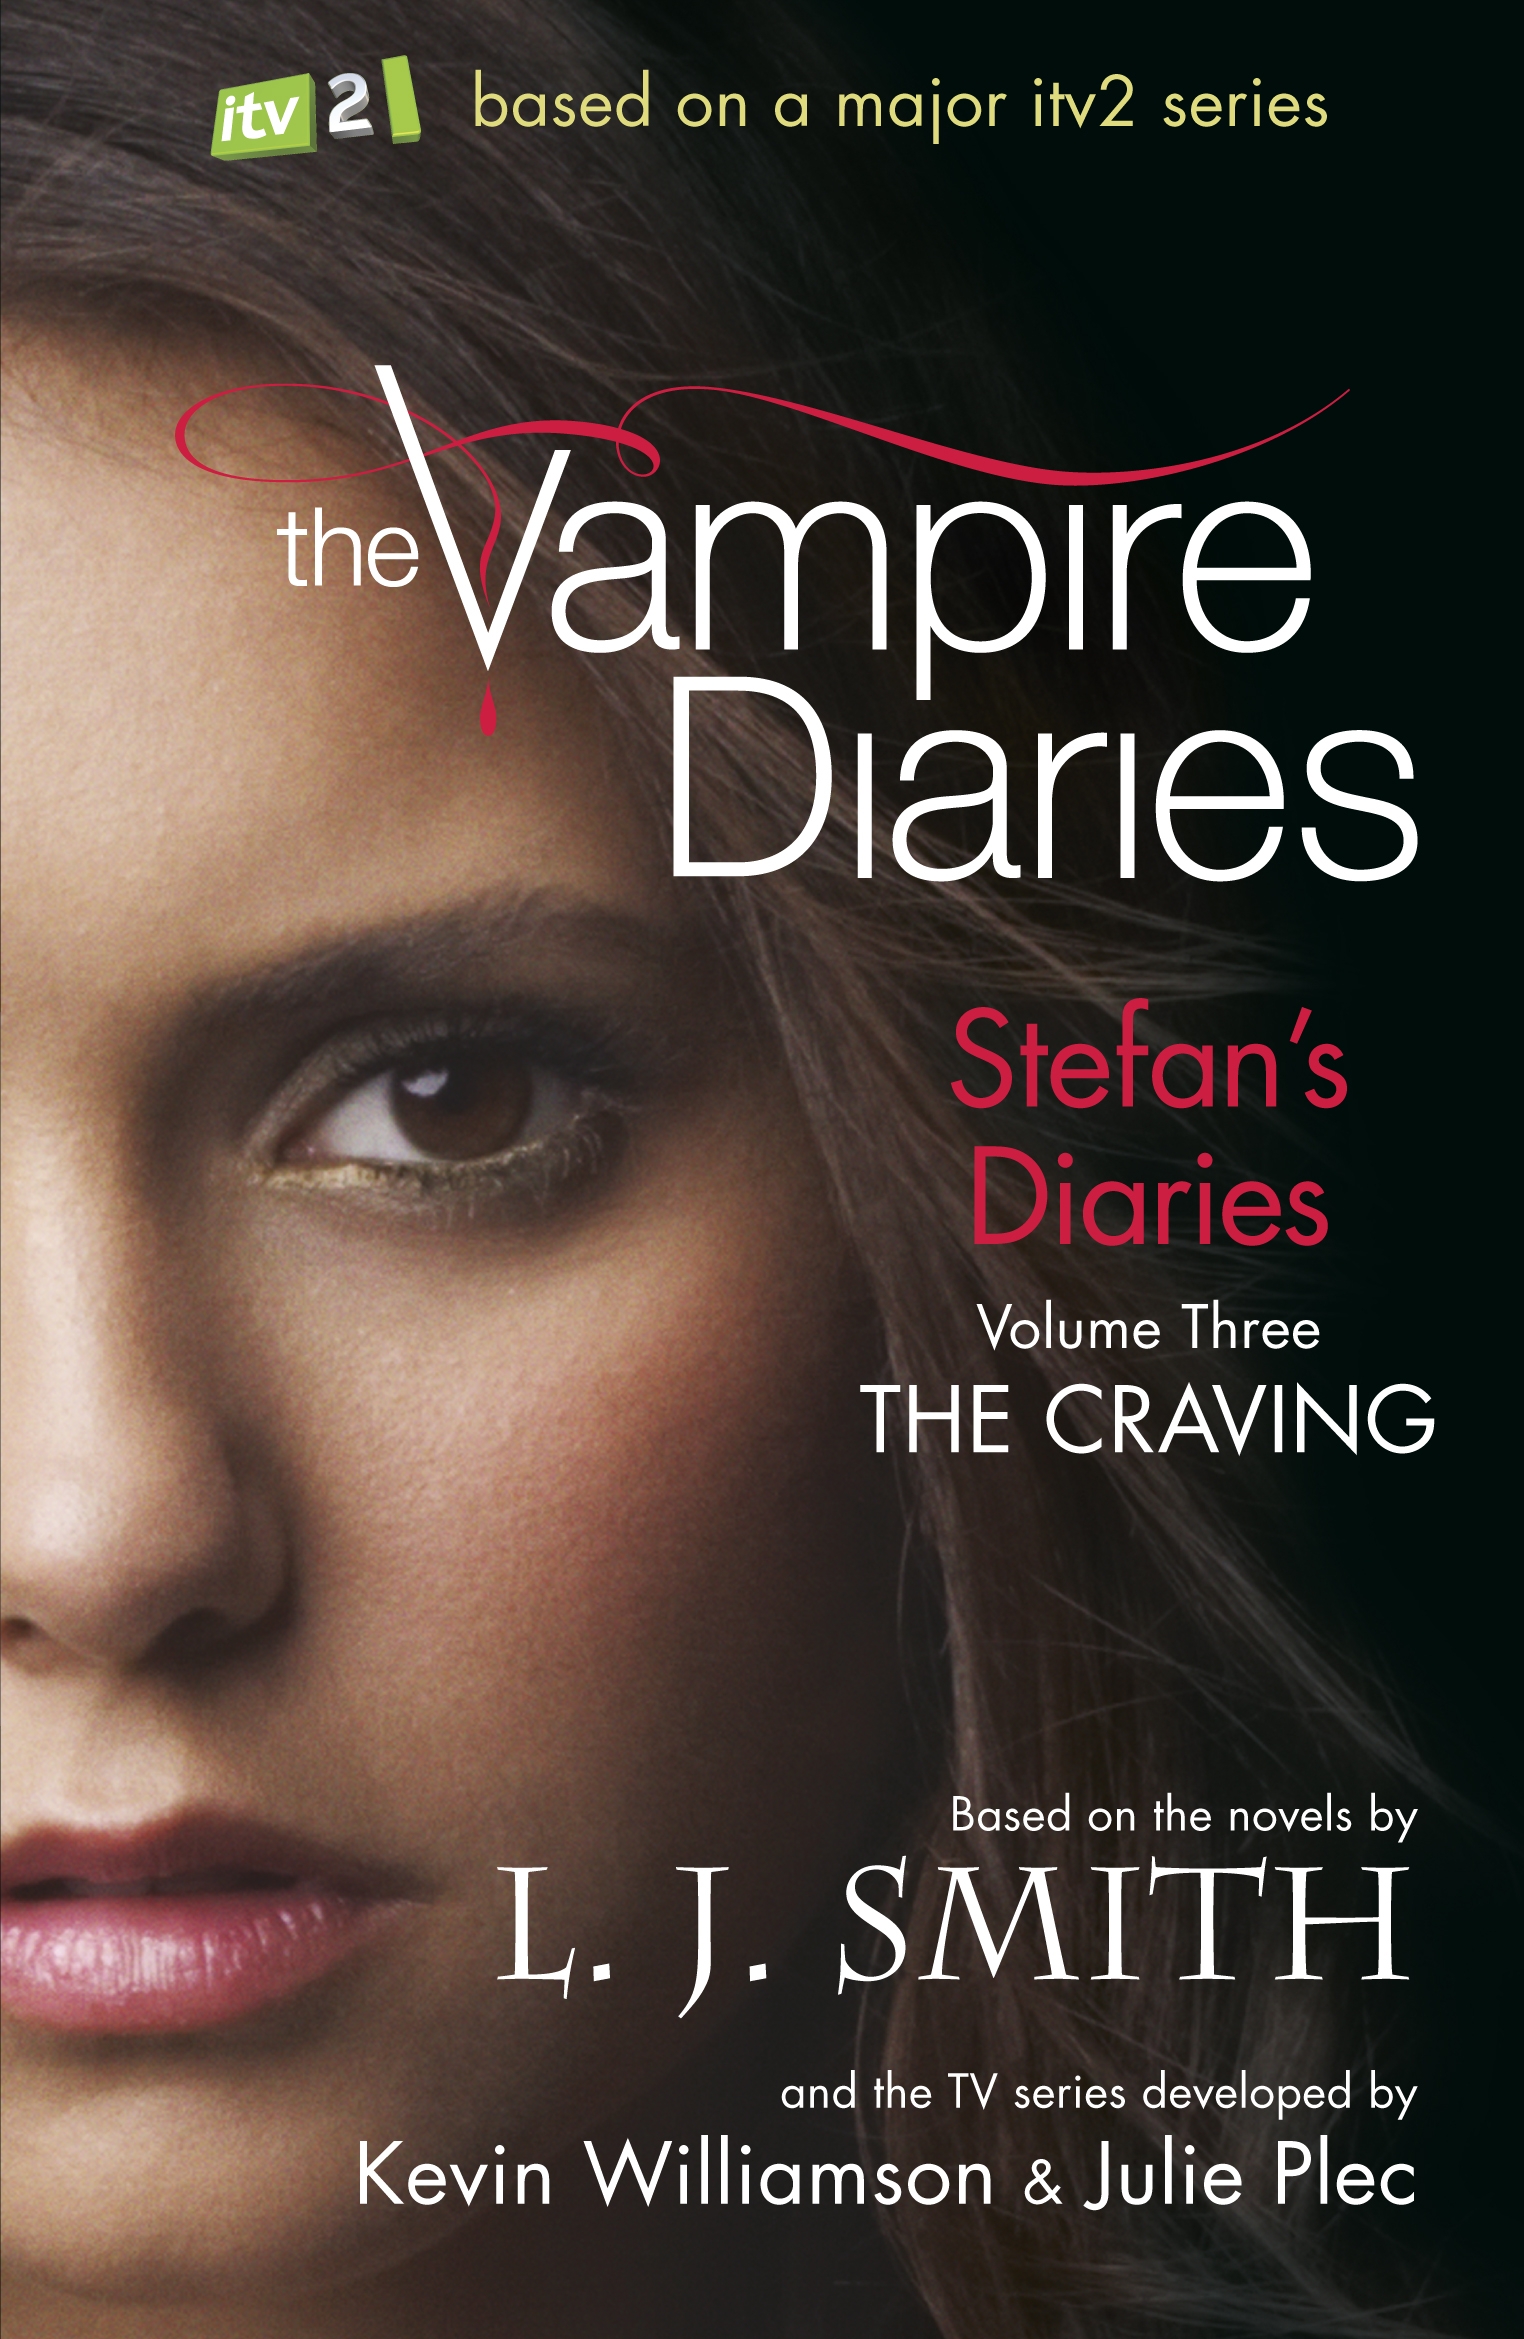 The Vampire Diaries: Stefan's Diaries: The Craving by L.J. Smith